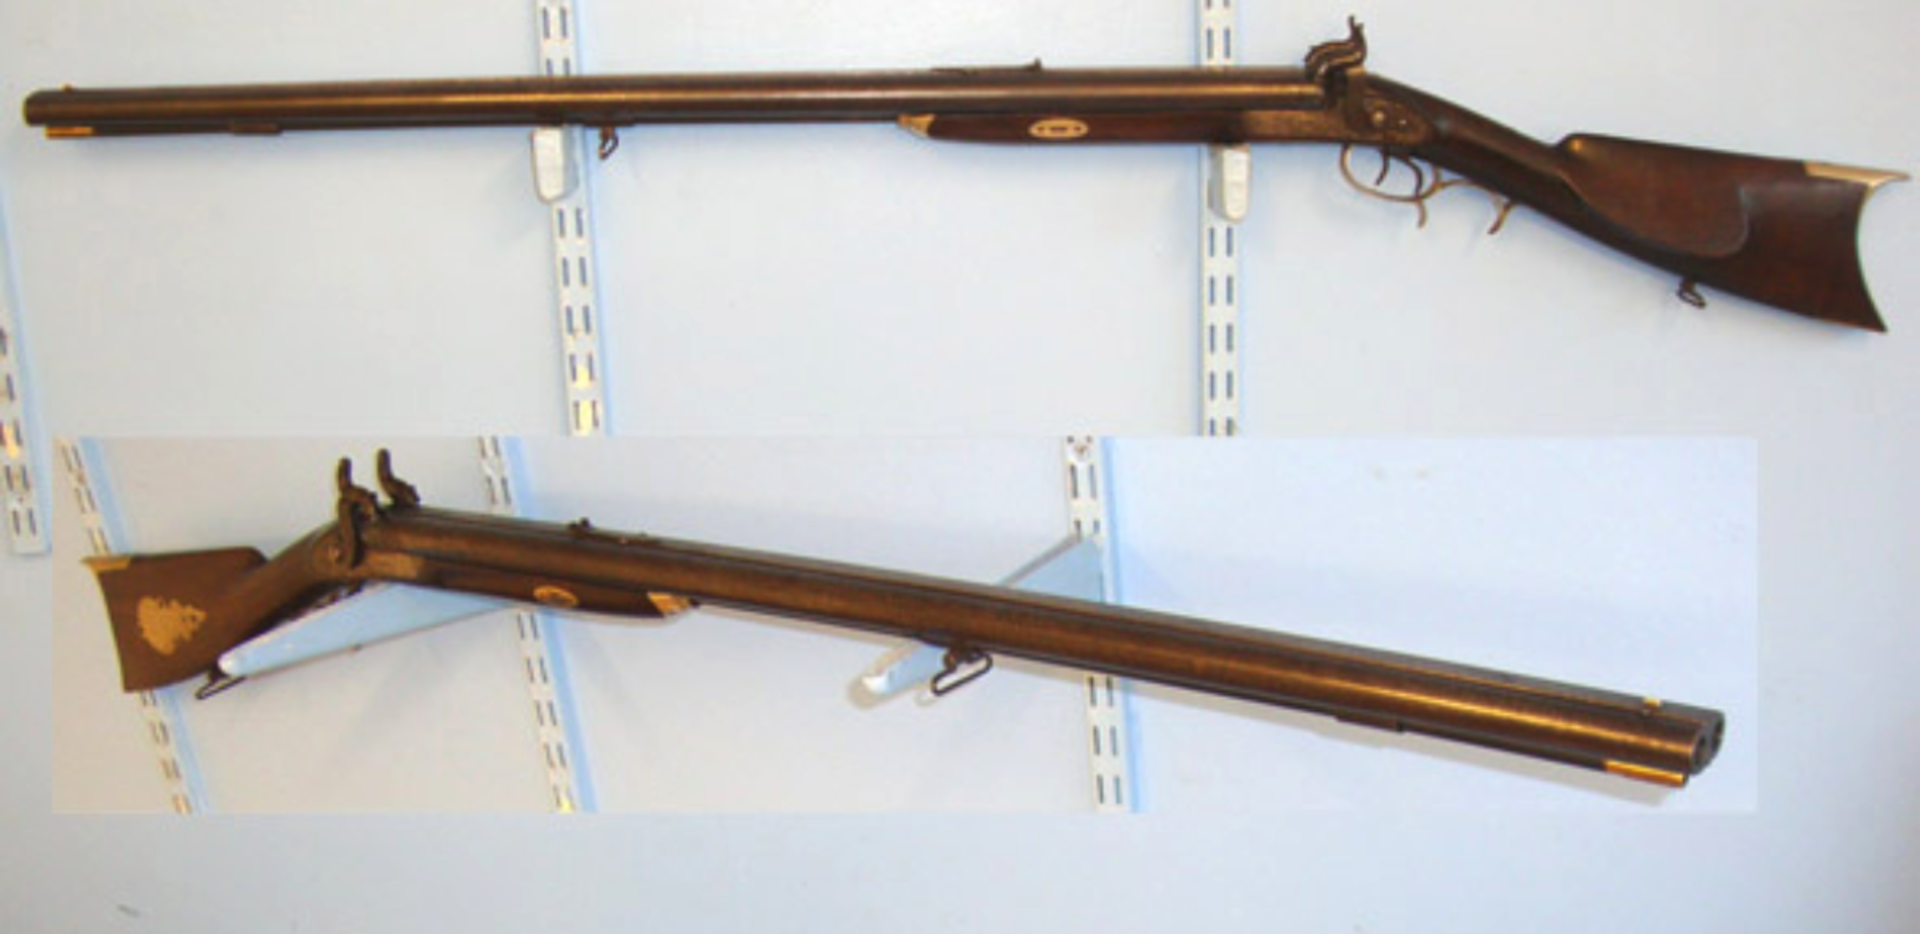 QUALITY American Civil War Era Double Barrelled .44” Patched Ball Calibre Kentucky Plains Rifle - Image 2 of 3